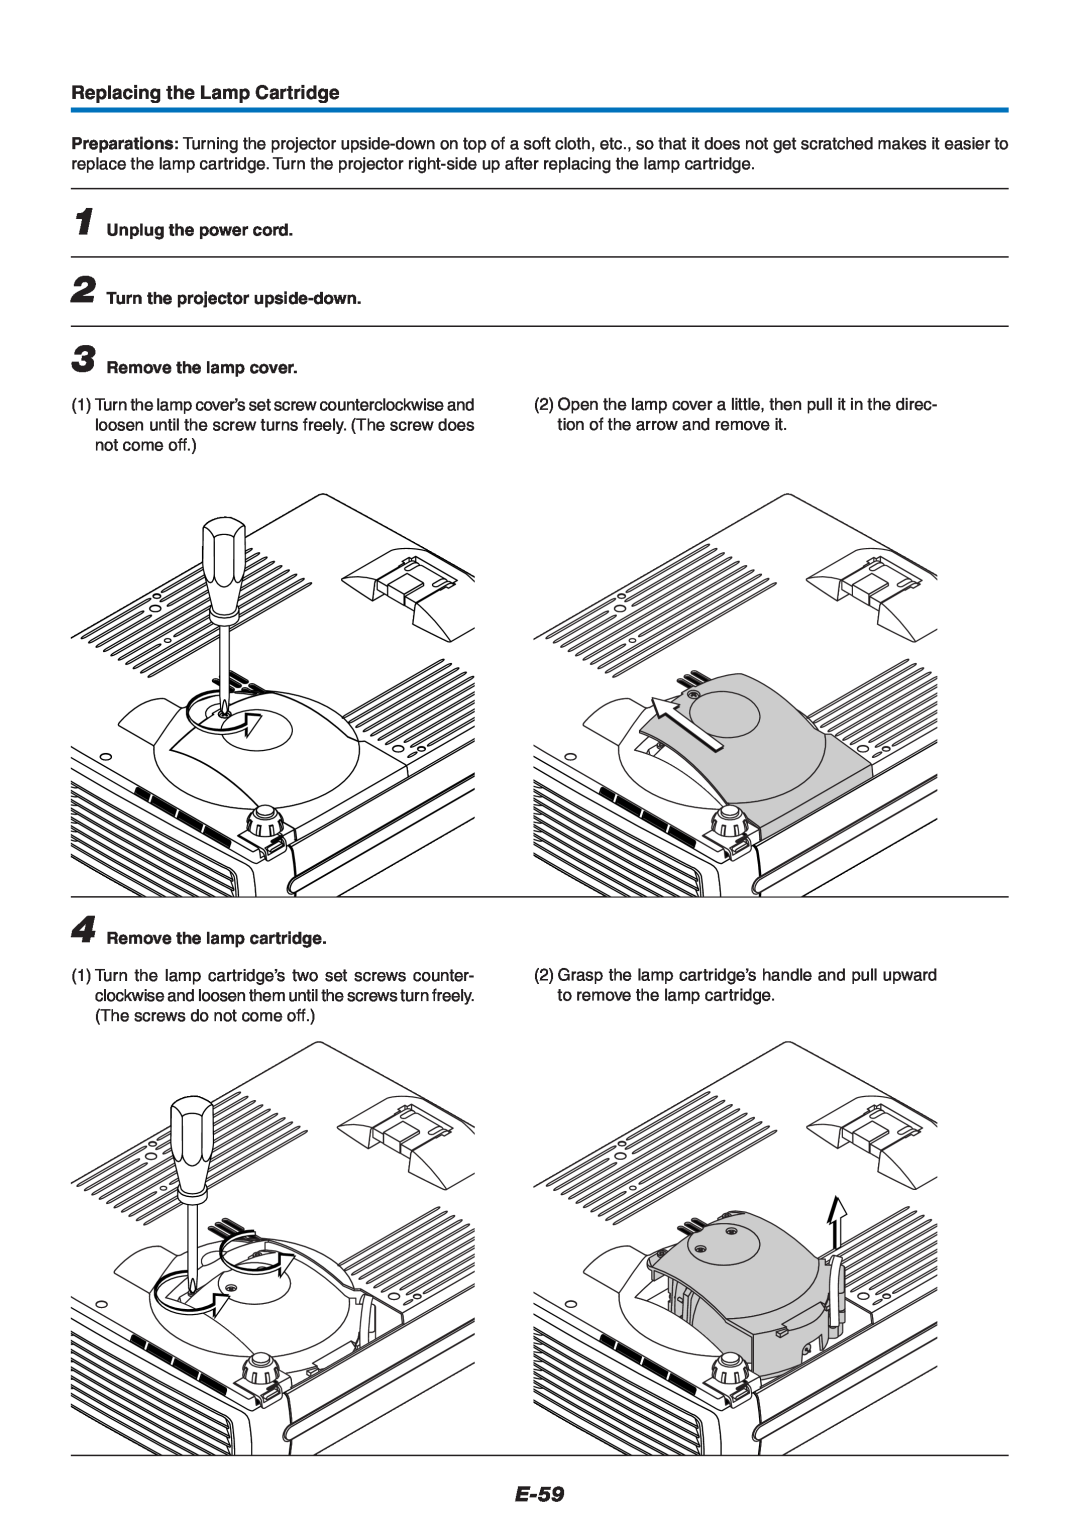 PLUS Vision U4-232 user manual E-59, Replacing the Lamp Cartridge, Unplug the power cord 2 Turn the projector upside-down 